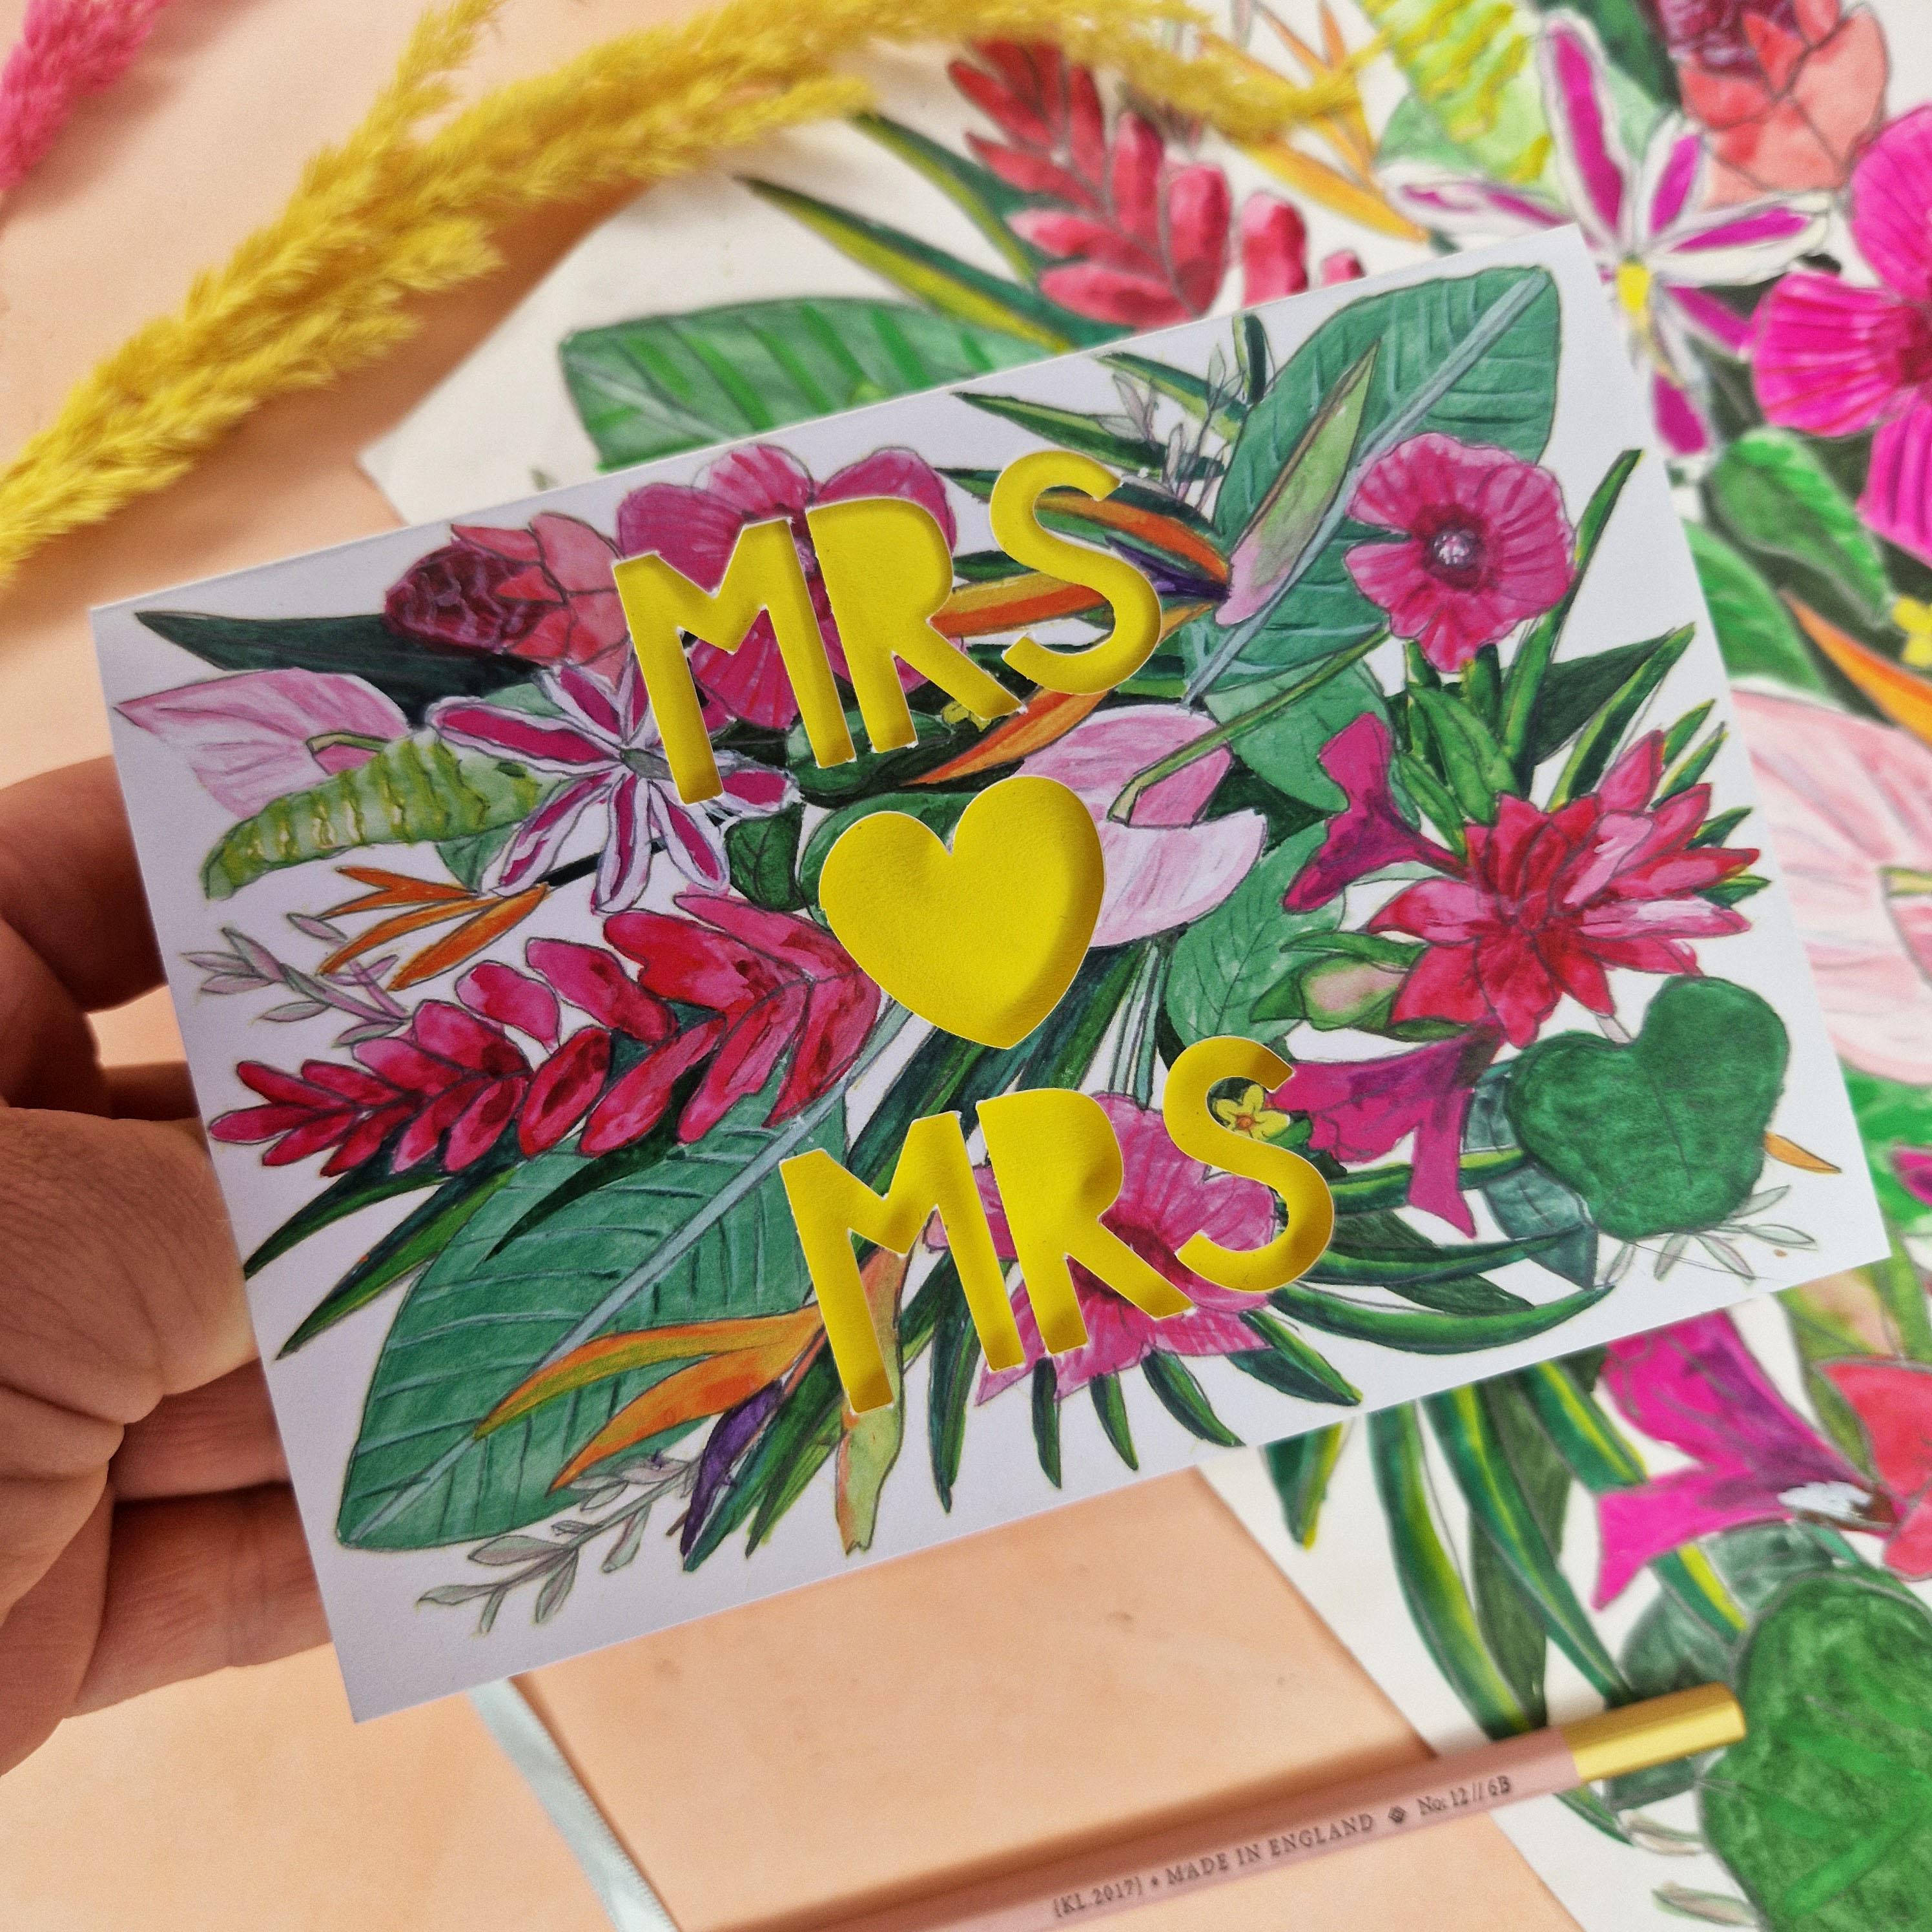 Hand shot of Floral Card with Paper cut text that says Mrs and Mrs with bright floral background.